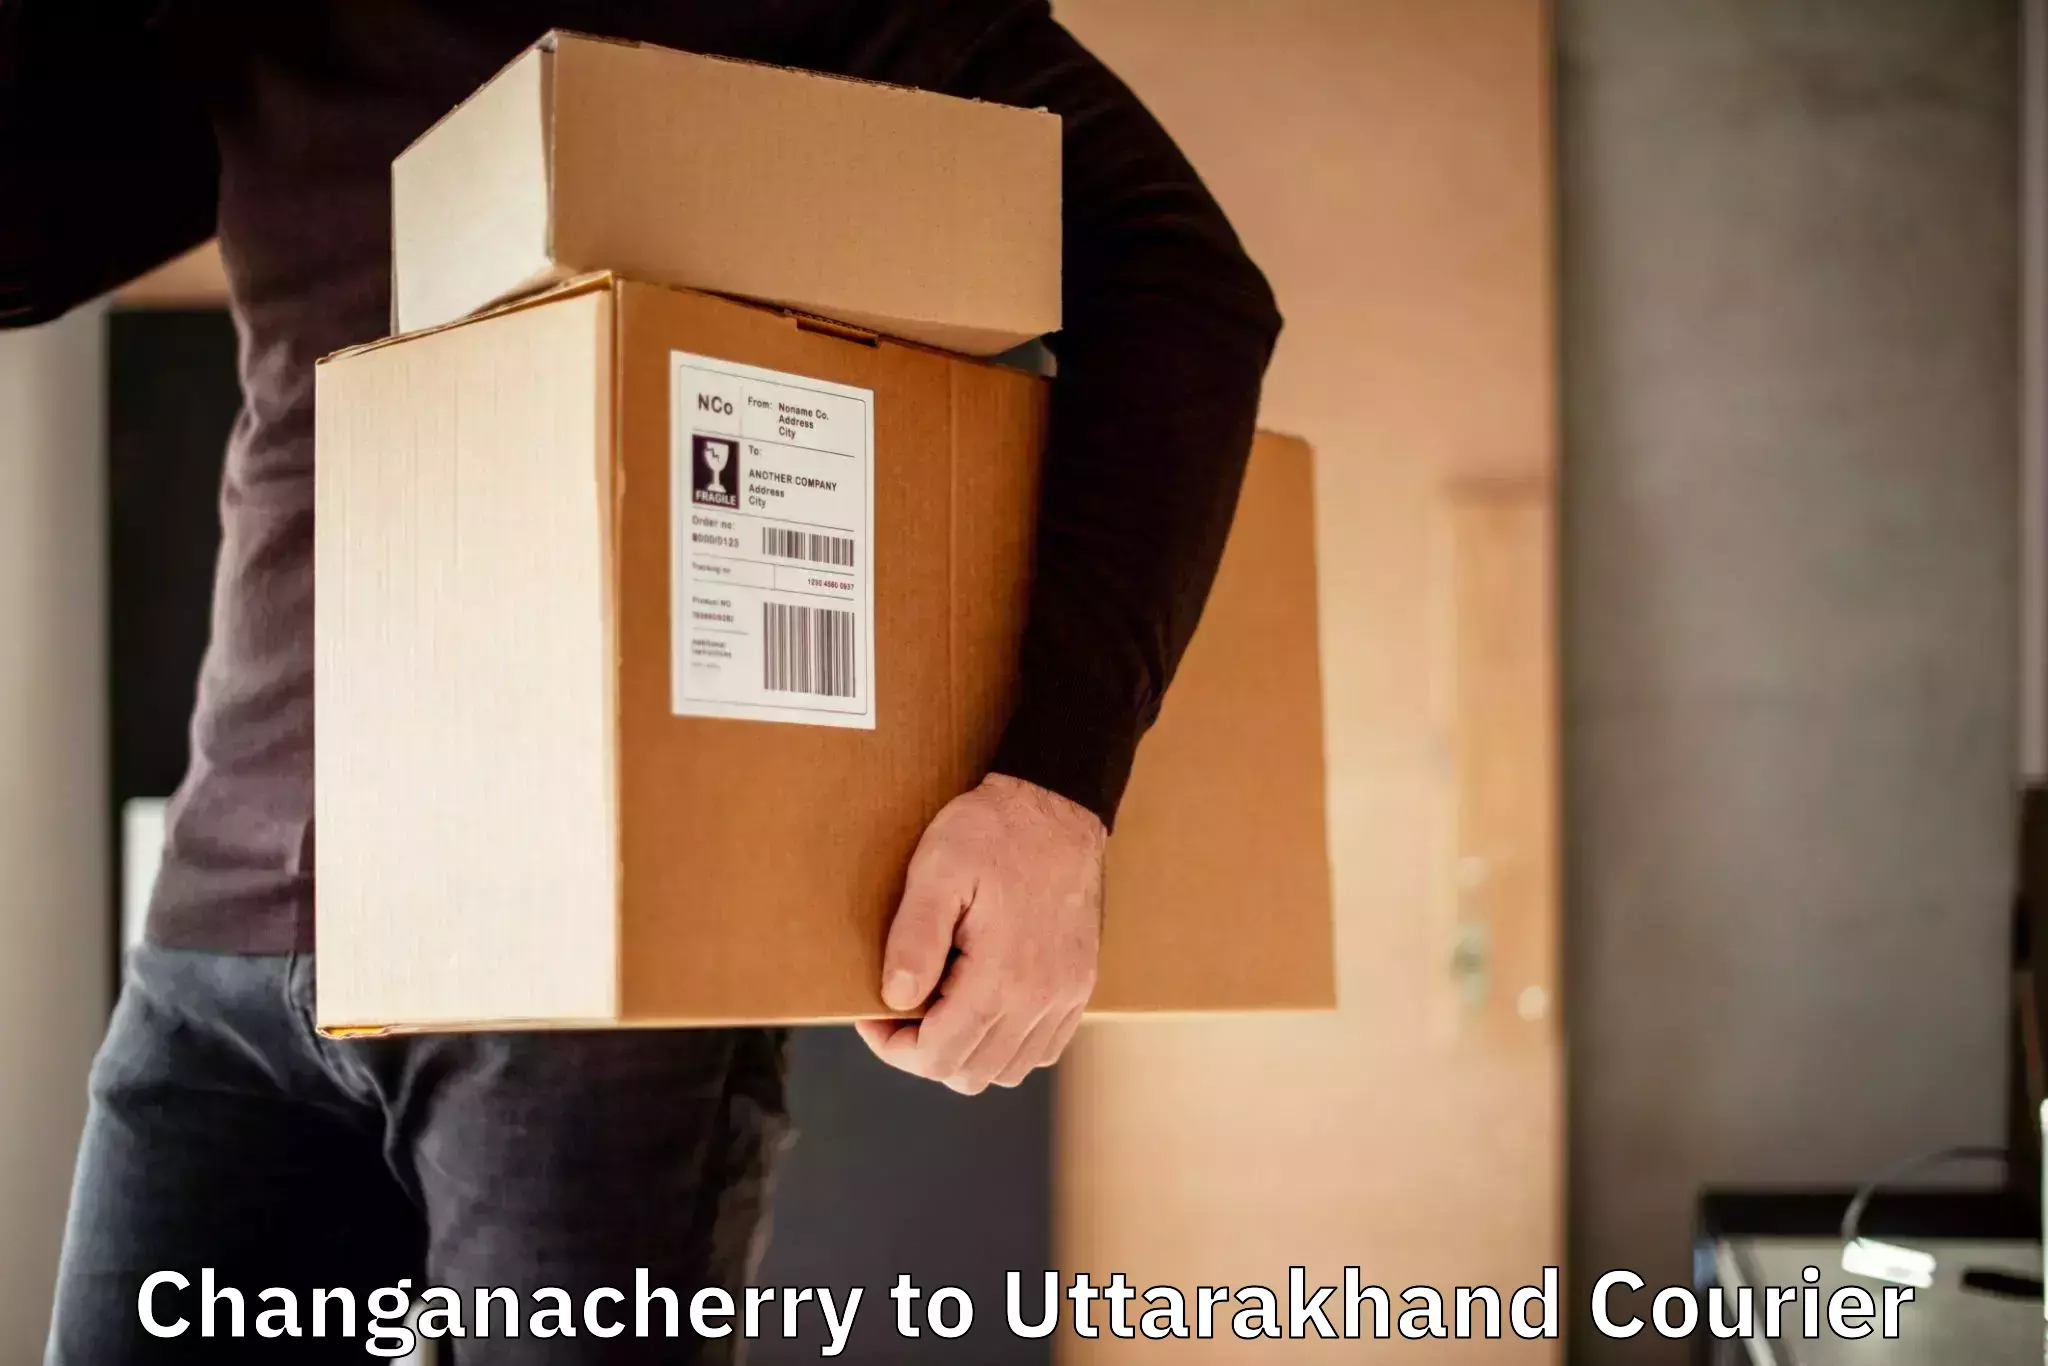 Cost-effective shipping solutions Changanacherry to Pithoragarh